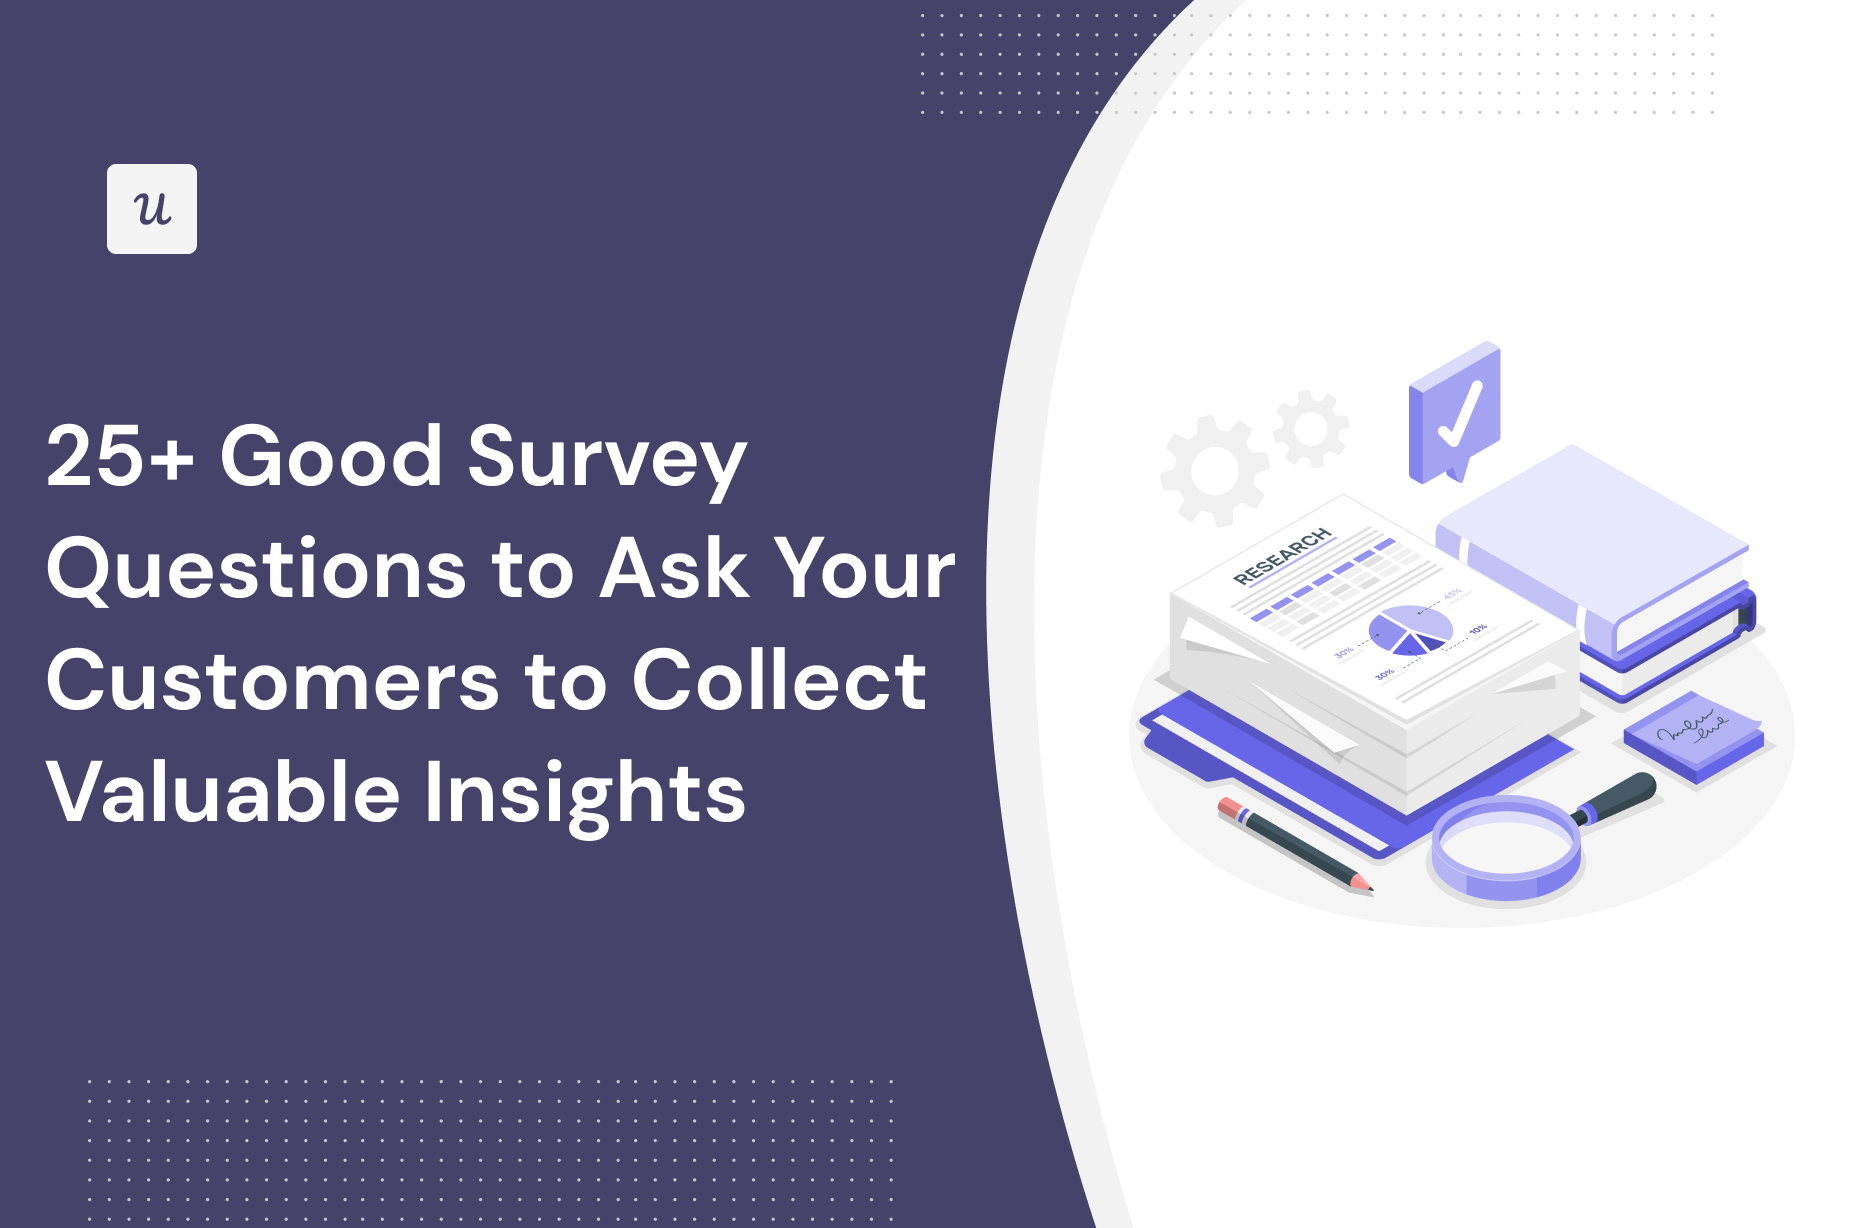 25+ Good Survey Questions to Ask Your Customers to Collect Valuable Insights